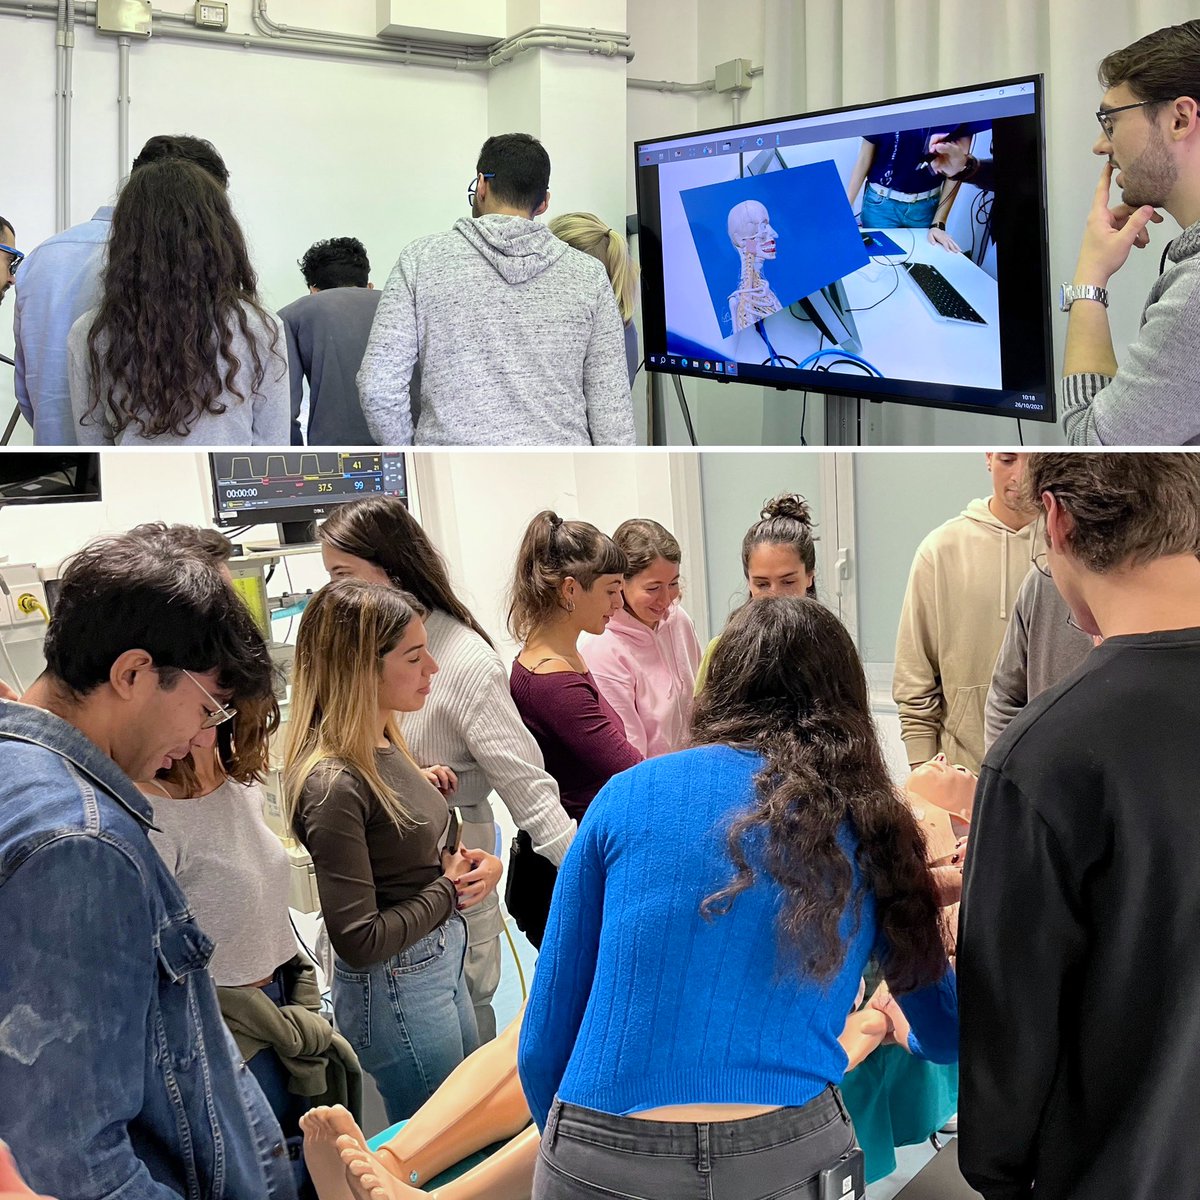 Every year since 2018,we host #Bioengineering and #roboticsEngineering #masterStudents of the #biomedicalRobotics course! 
Last week,50 students visited #SimAv and #jets and tried some of our #manikins #simulators and #research #prototypes!#medicalSimulation #healthcareSimulation